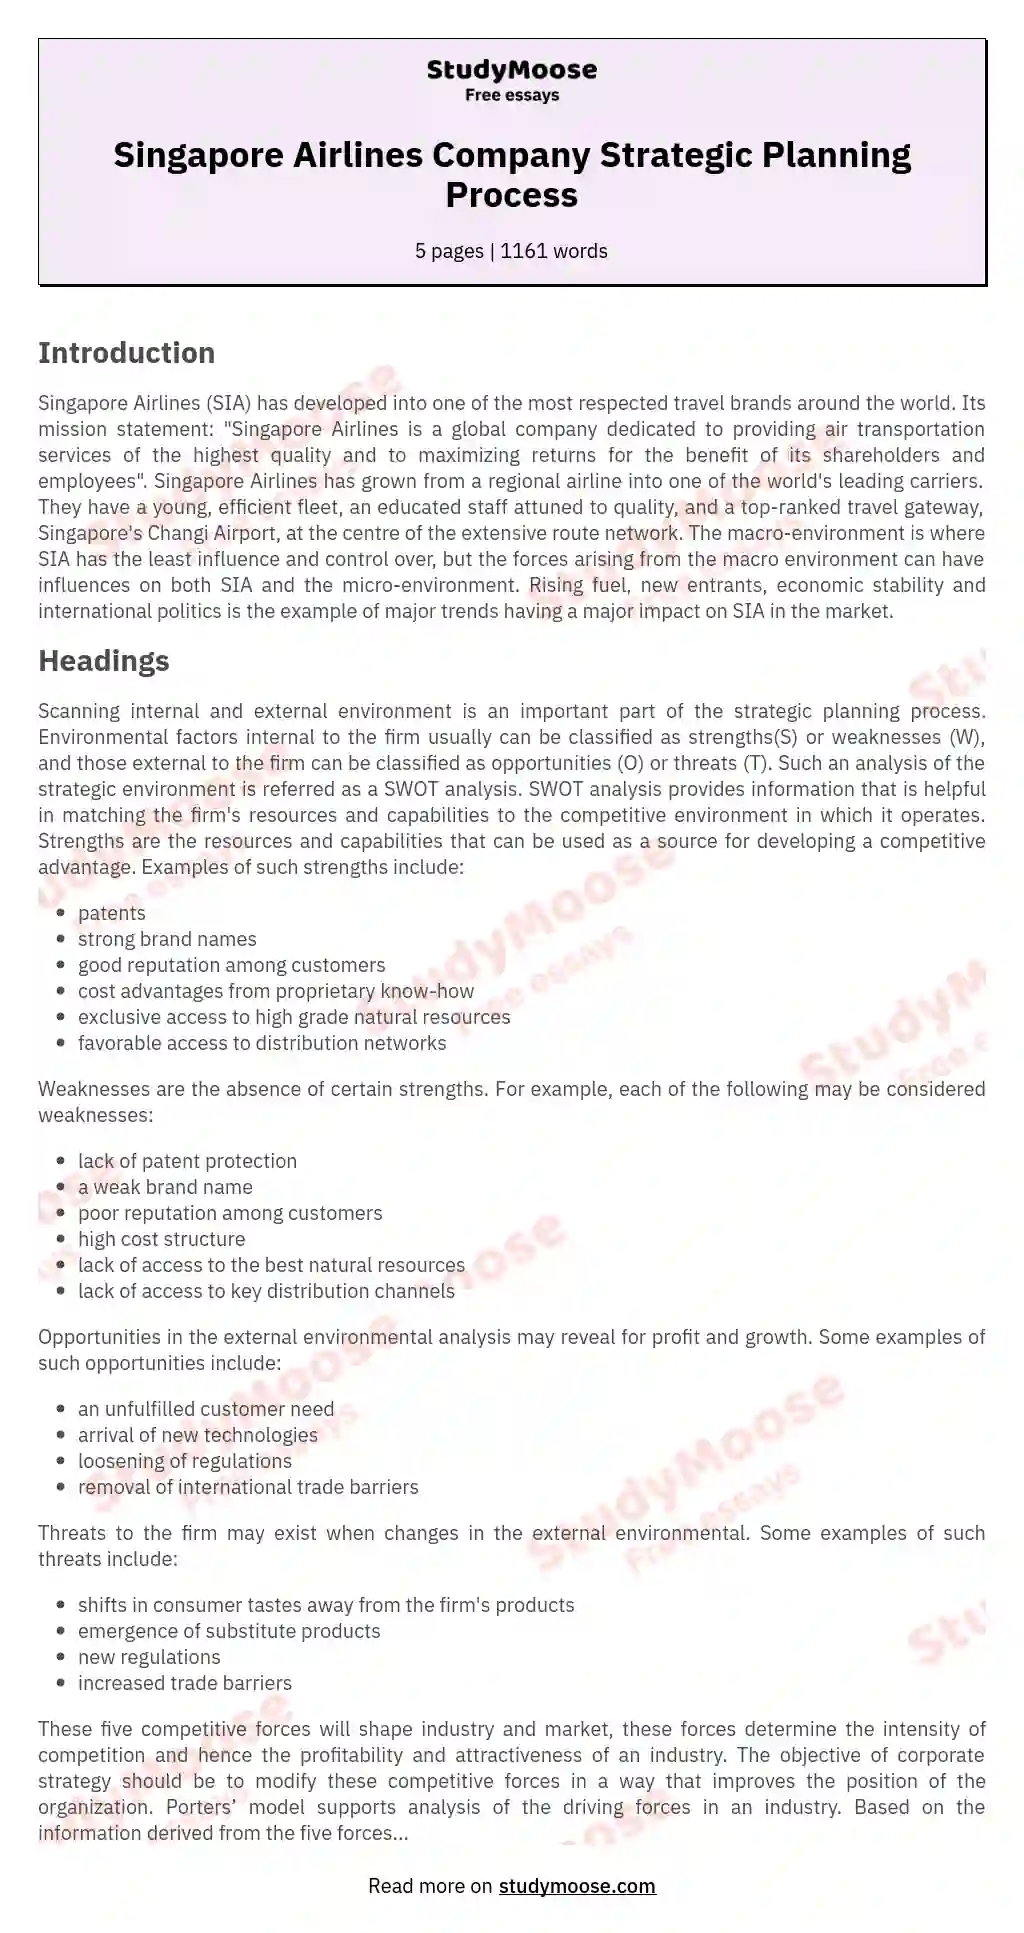 Singapore Airlines Company Strategic Planning Process essay